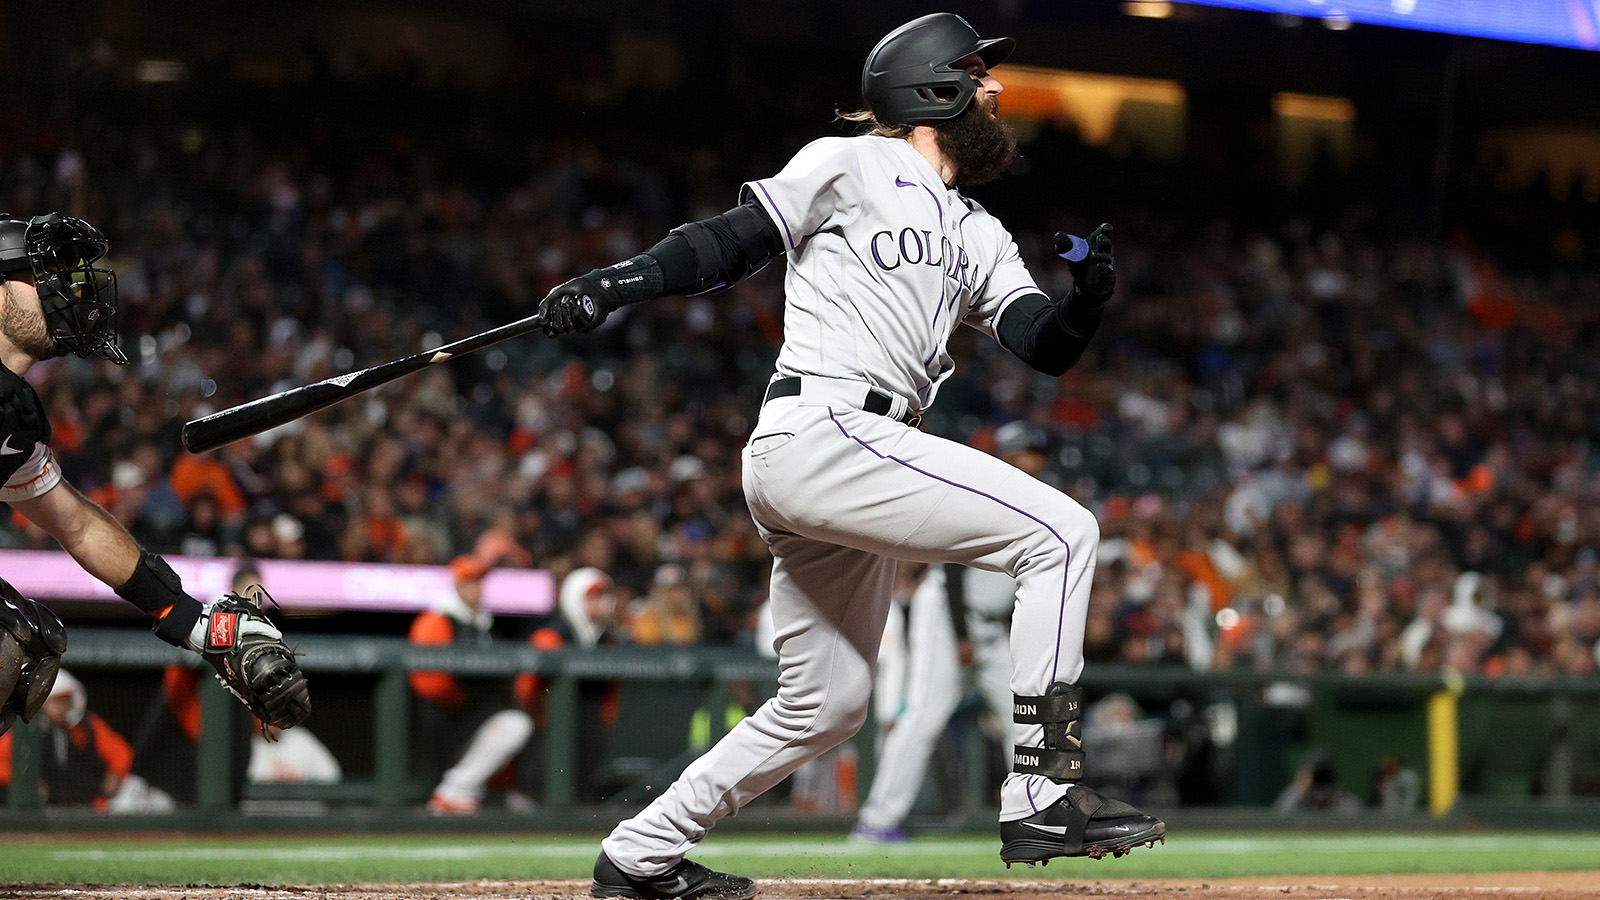 Charlie Blackmon of the Colorado Rockies hits a pinch-hit three-run home run int he sixth inning against the San Francisco Giants at Oracle Park on June 7, 2022.